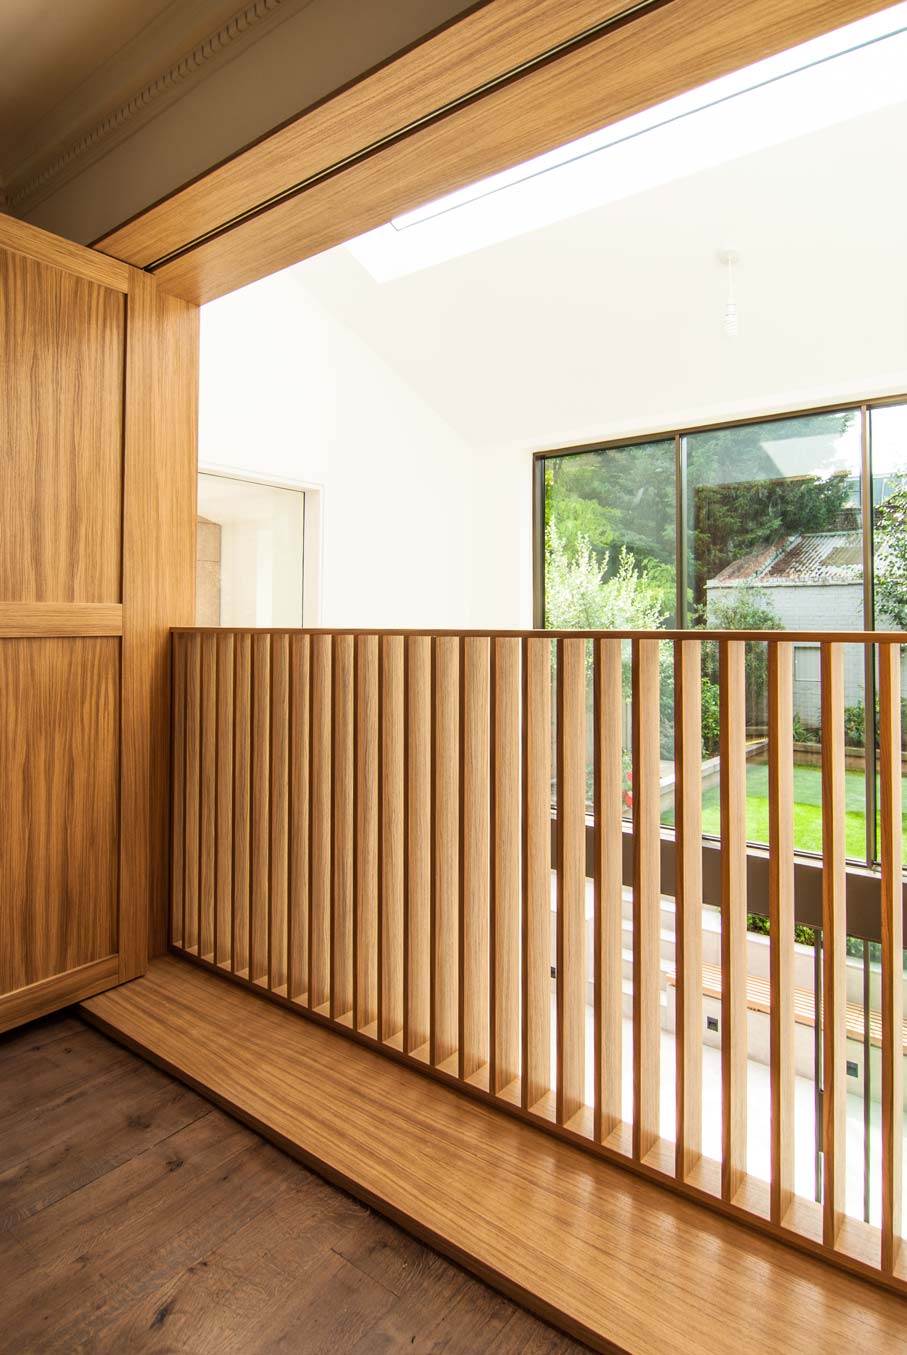 Close up of the Oak shutters balustrade and view onto the extension and sunken courtyard.